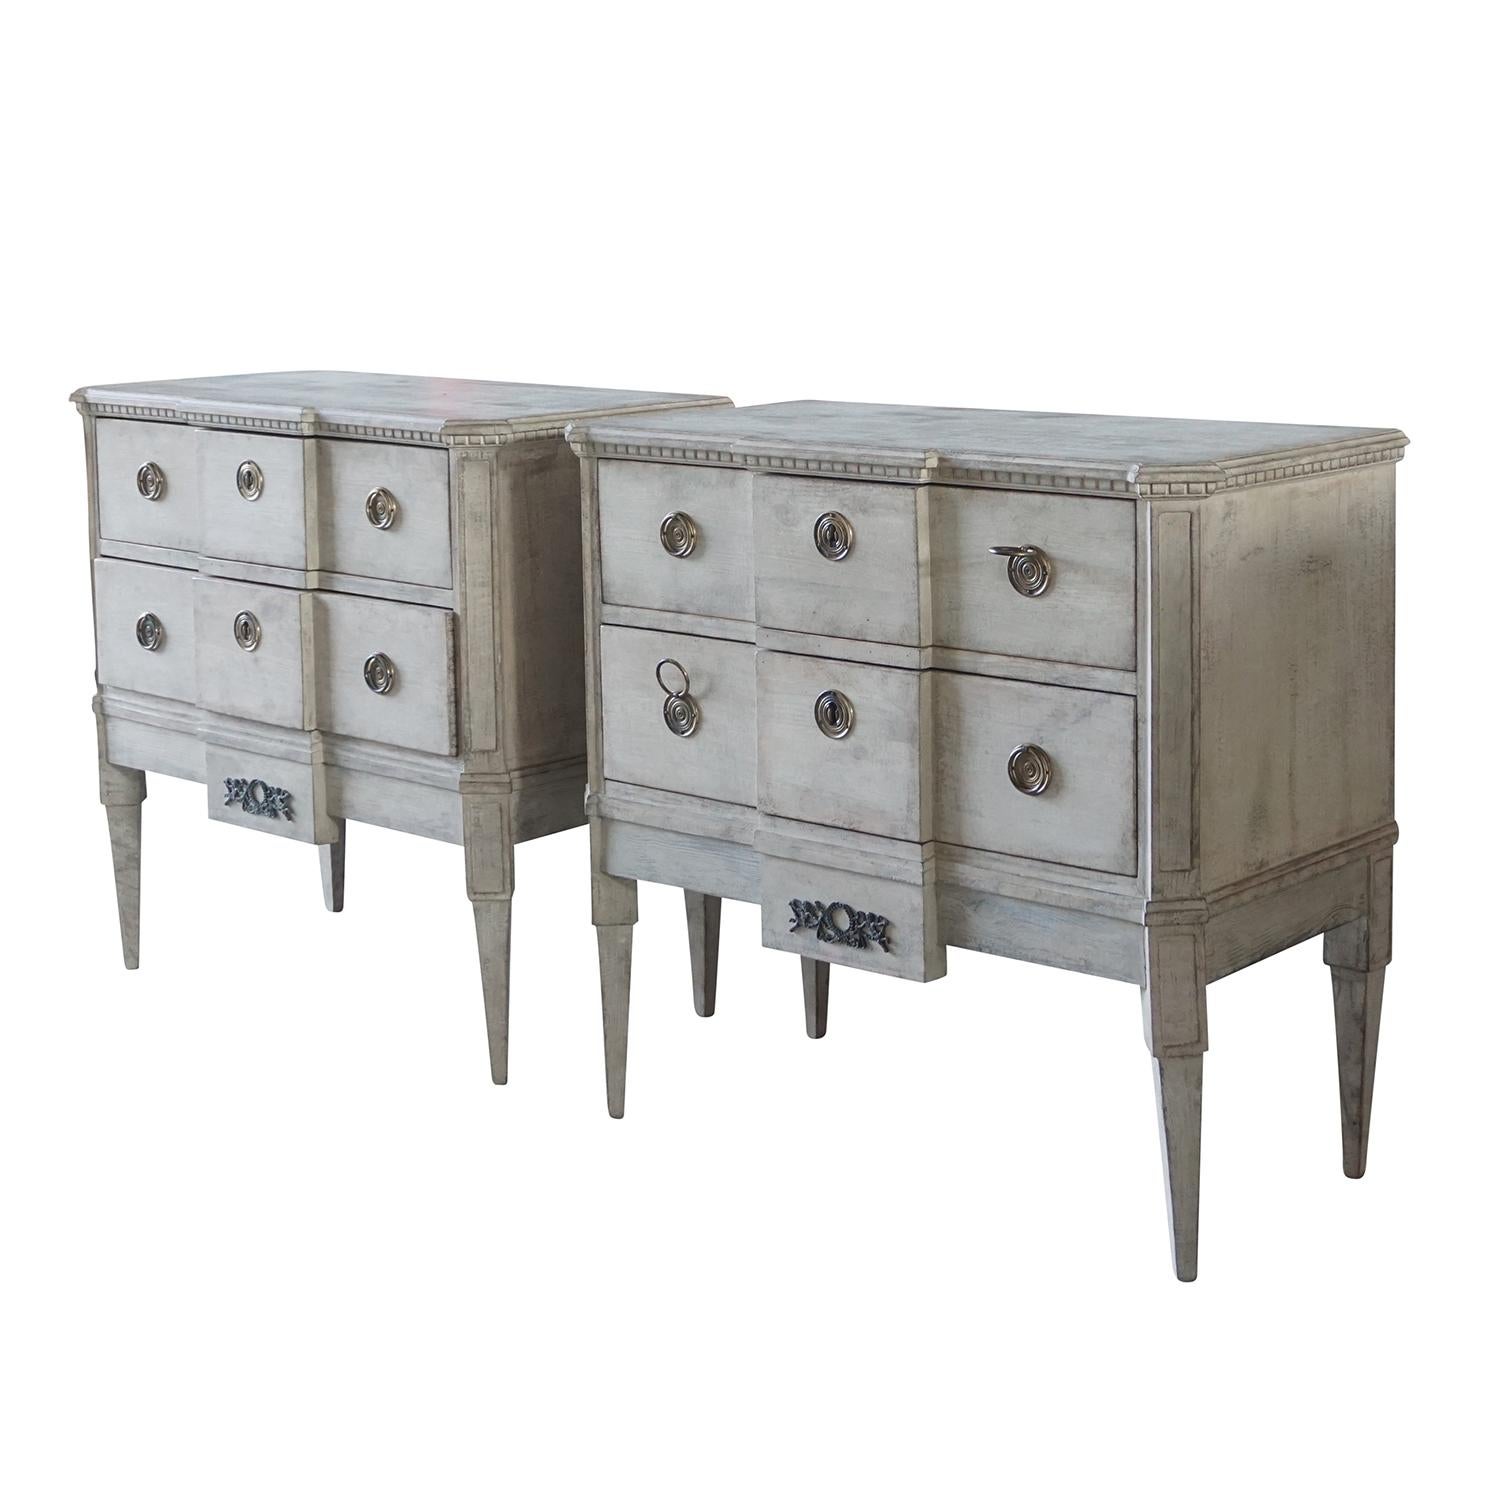 An antique pair of neoclassical commodes with two drawers and key, of light grey painted pinewood. The Swedish Gustavian hand carved chests are in good condition, detailed in the neoclassical Greek style with their original chrome hardware and keys.